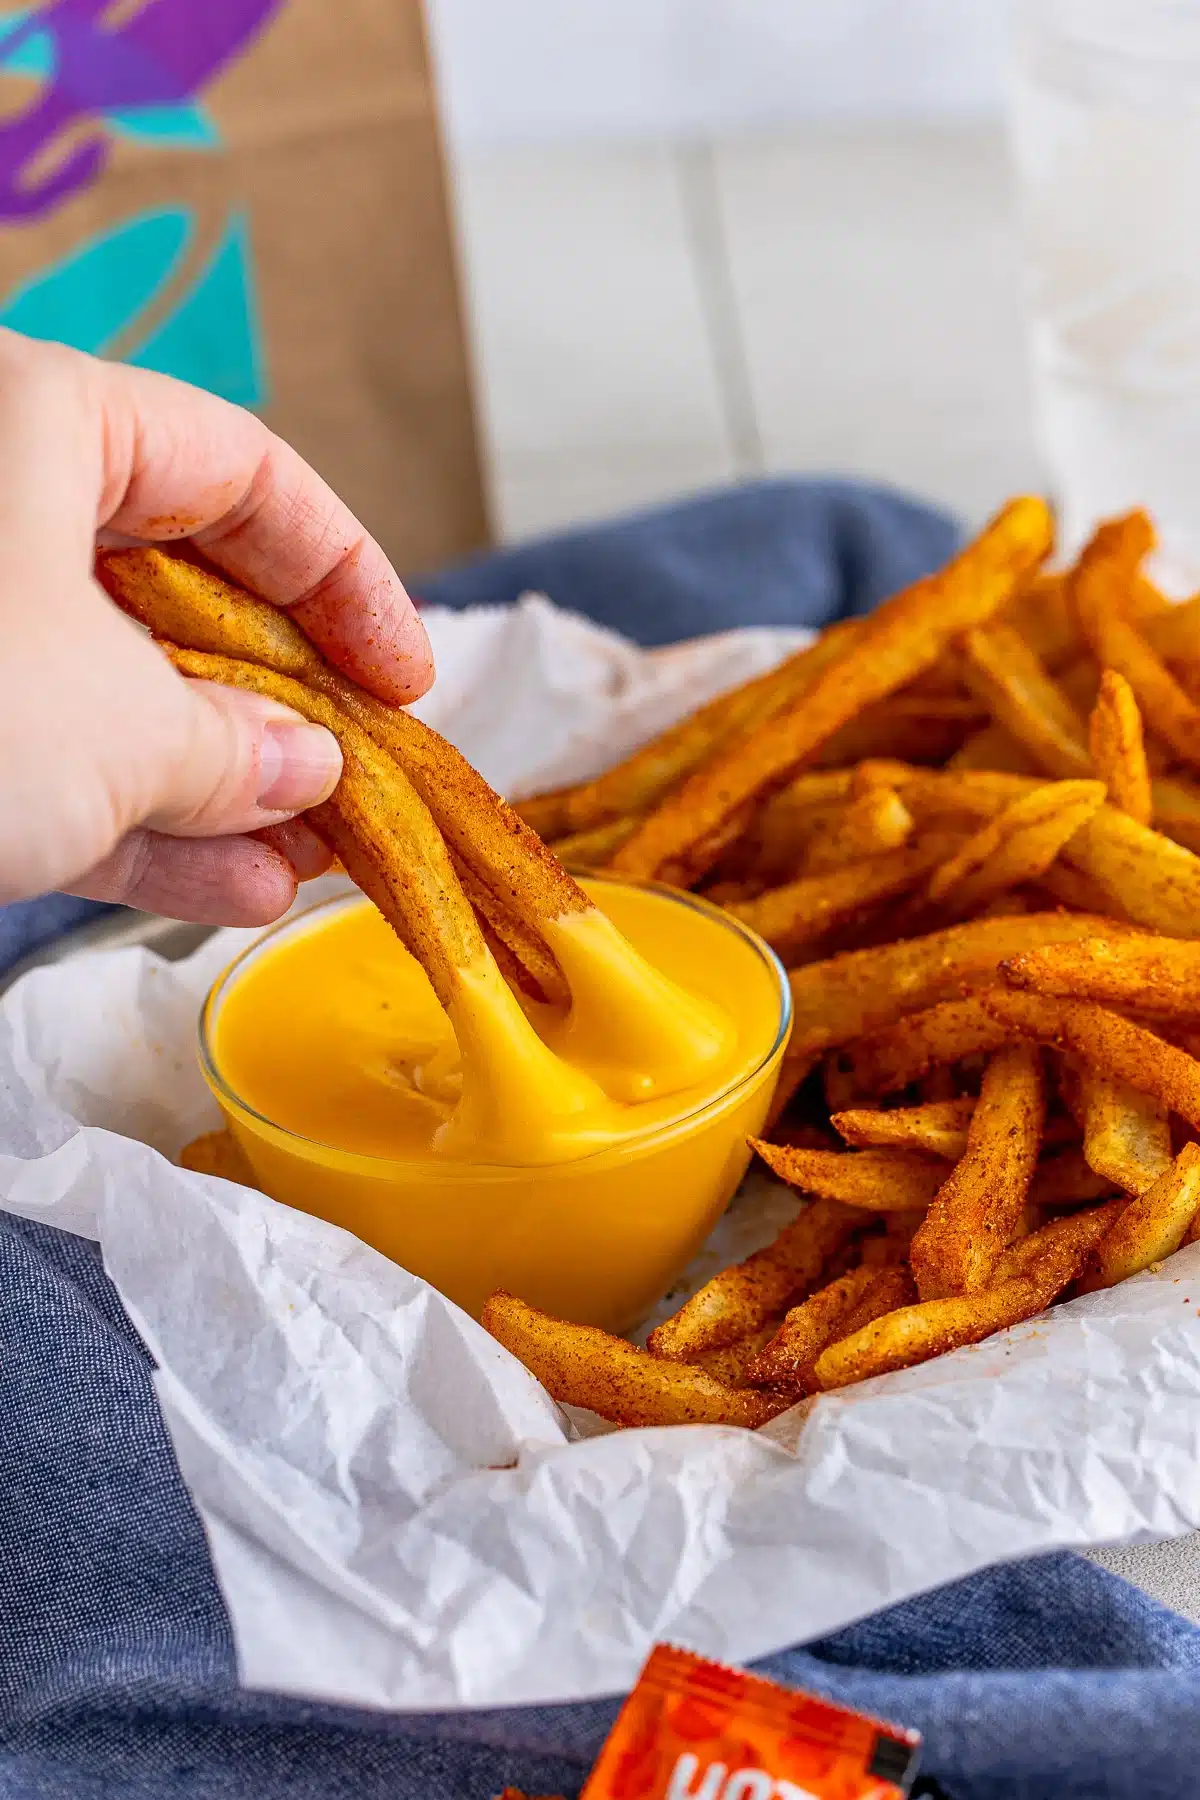 Hand dipping seasoned fries into cheese sauce.